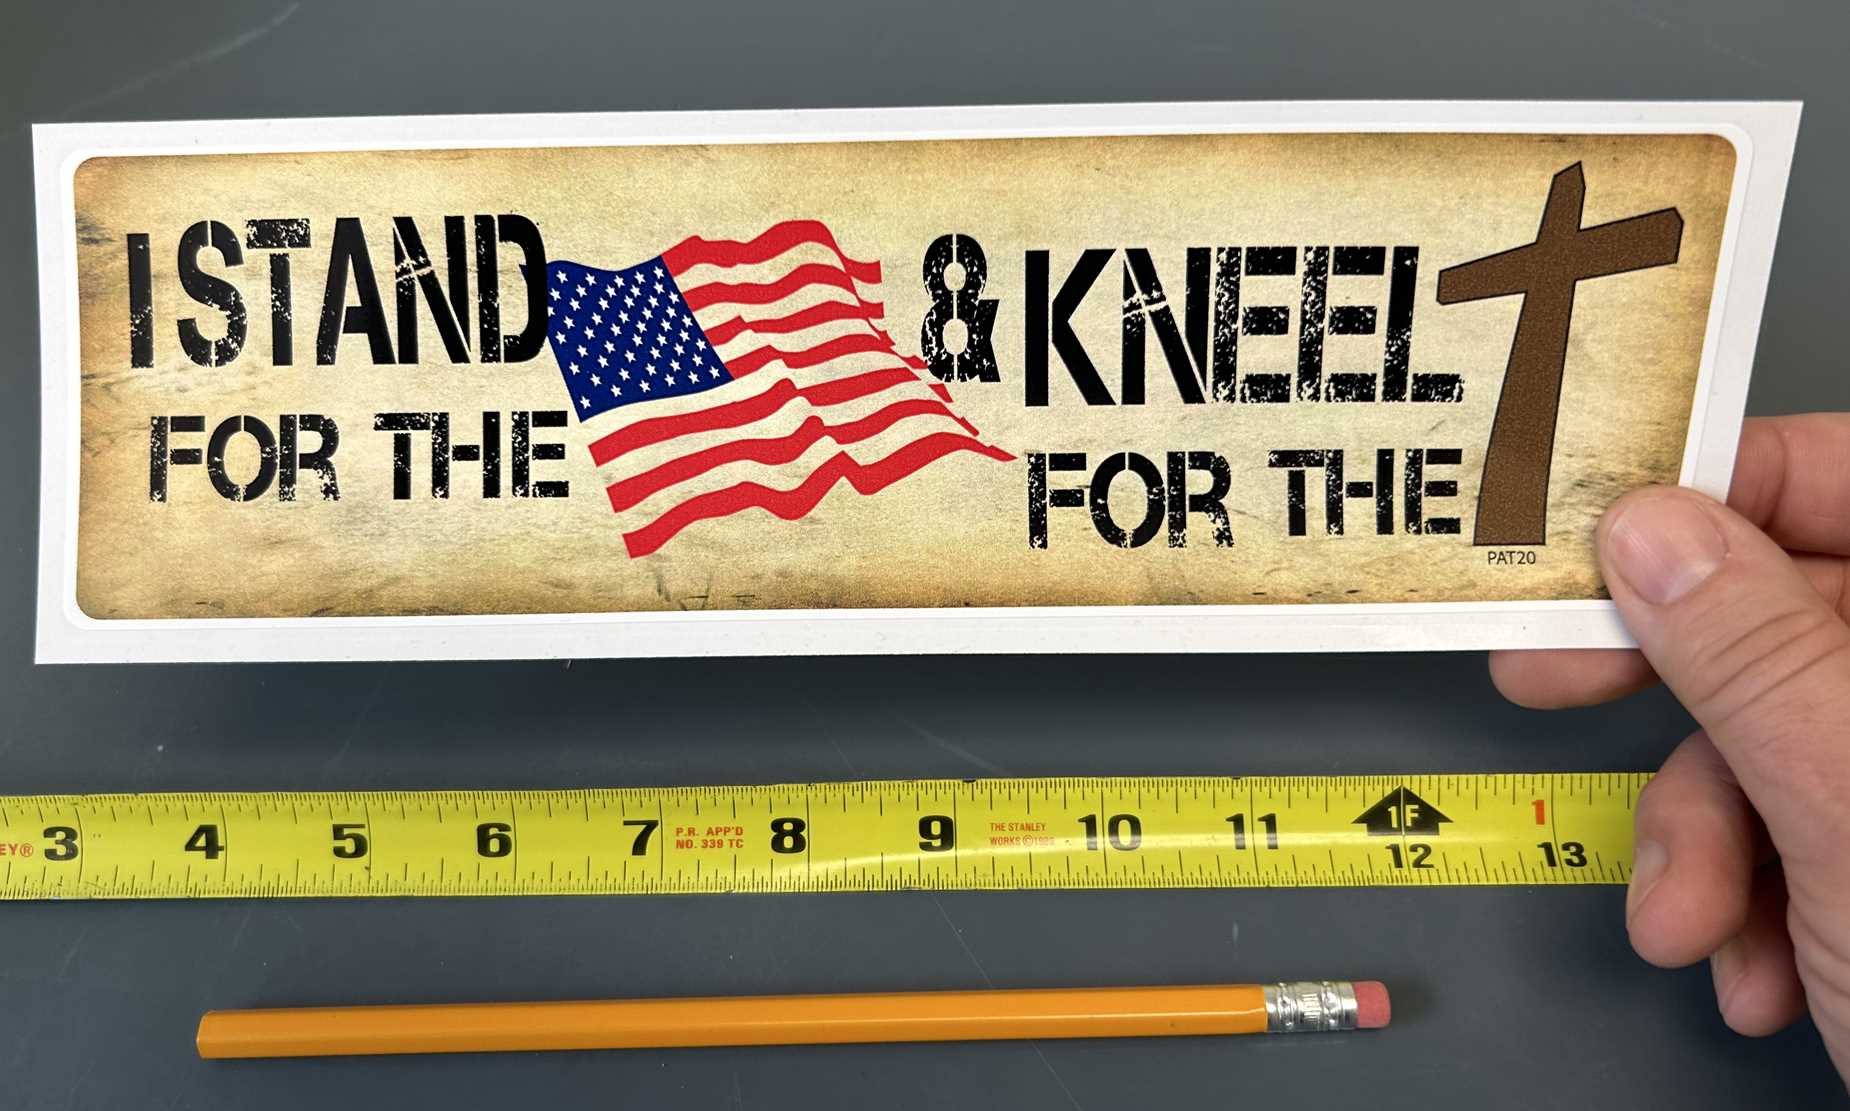 I STAND FOR THE FLAG AND KNEEL FOR THE CROSS BUMPER STICKER IN HAND